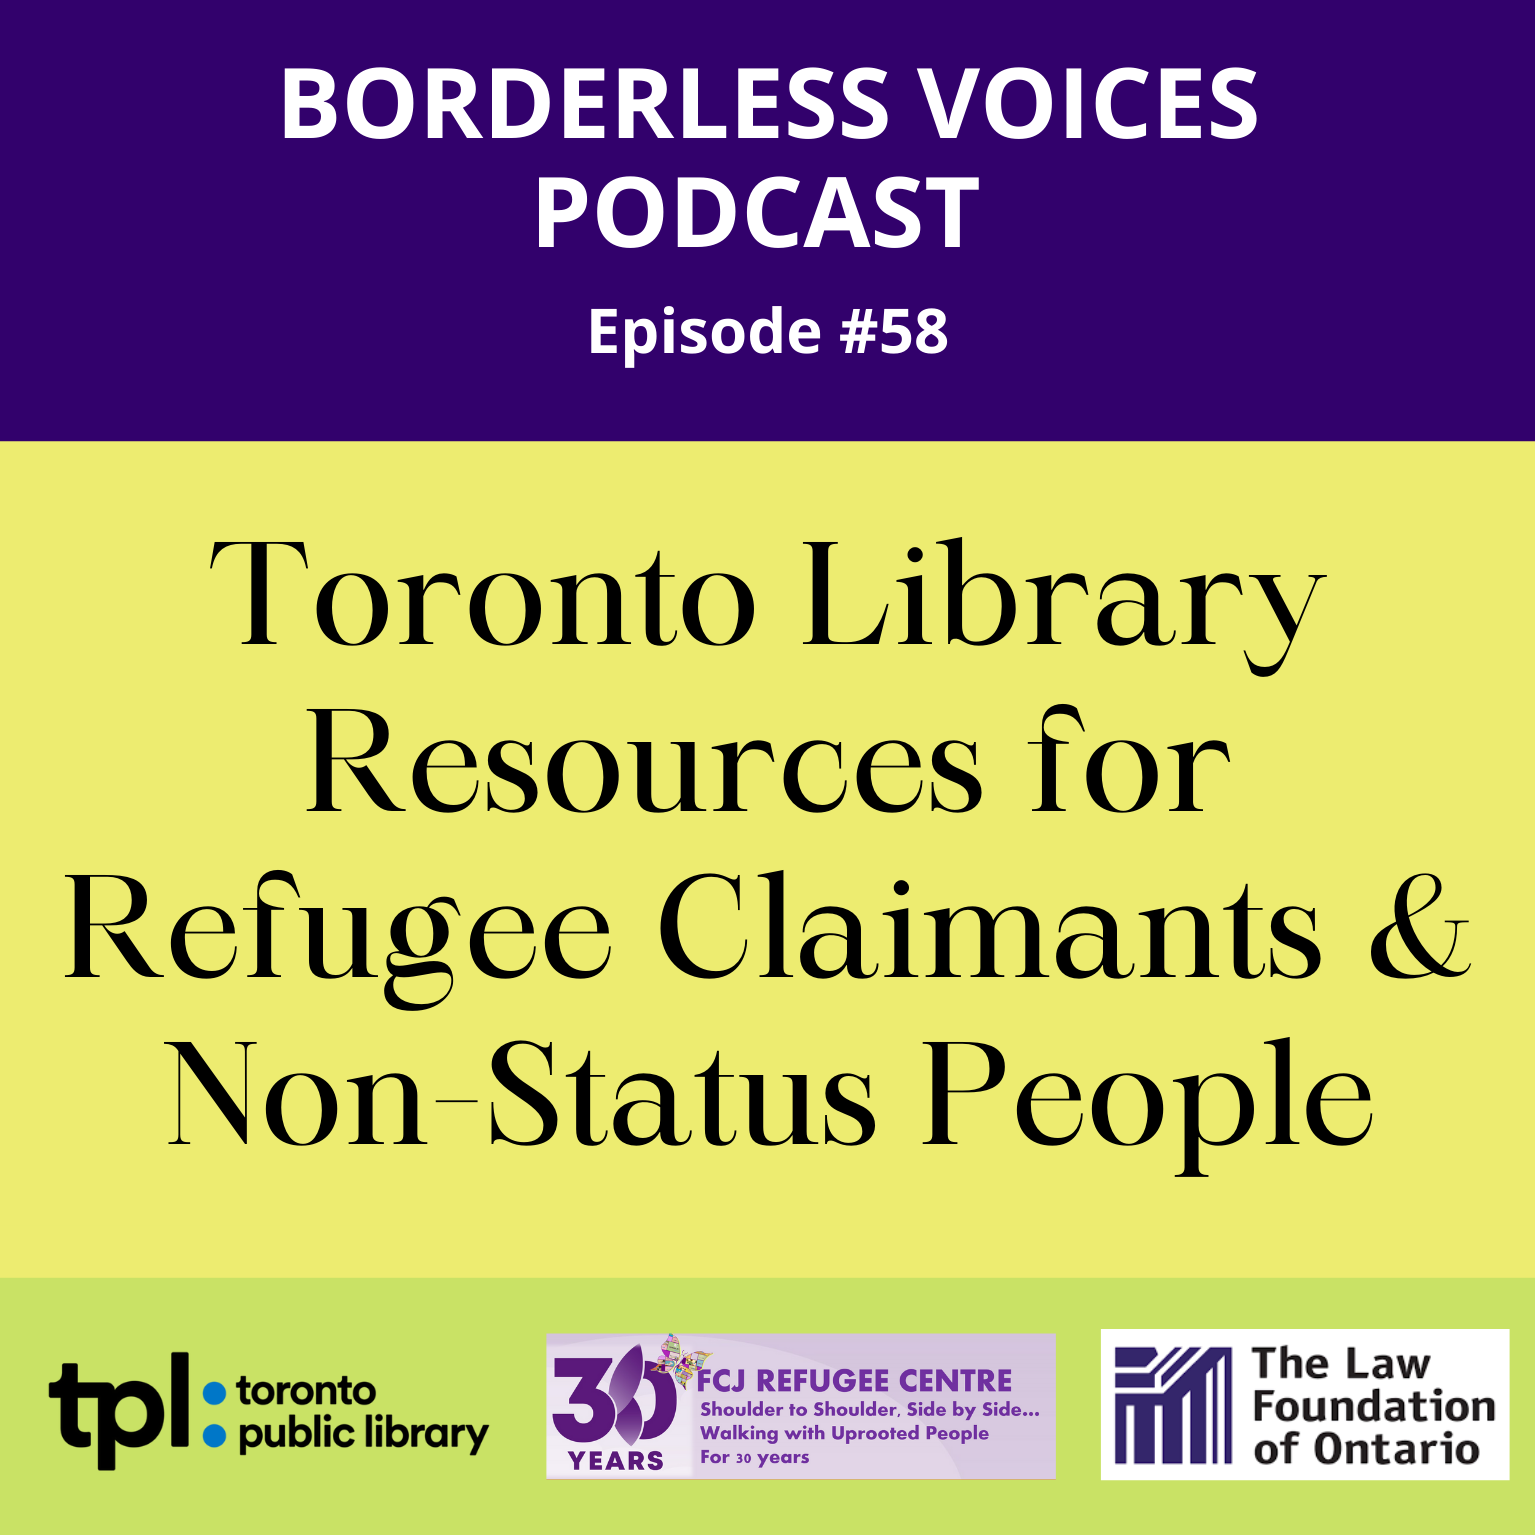 Episode #58: Toronto Library Resources for Refugee Claimants & Non-Status People